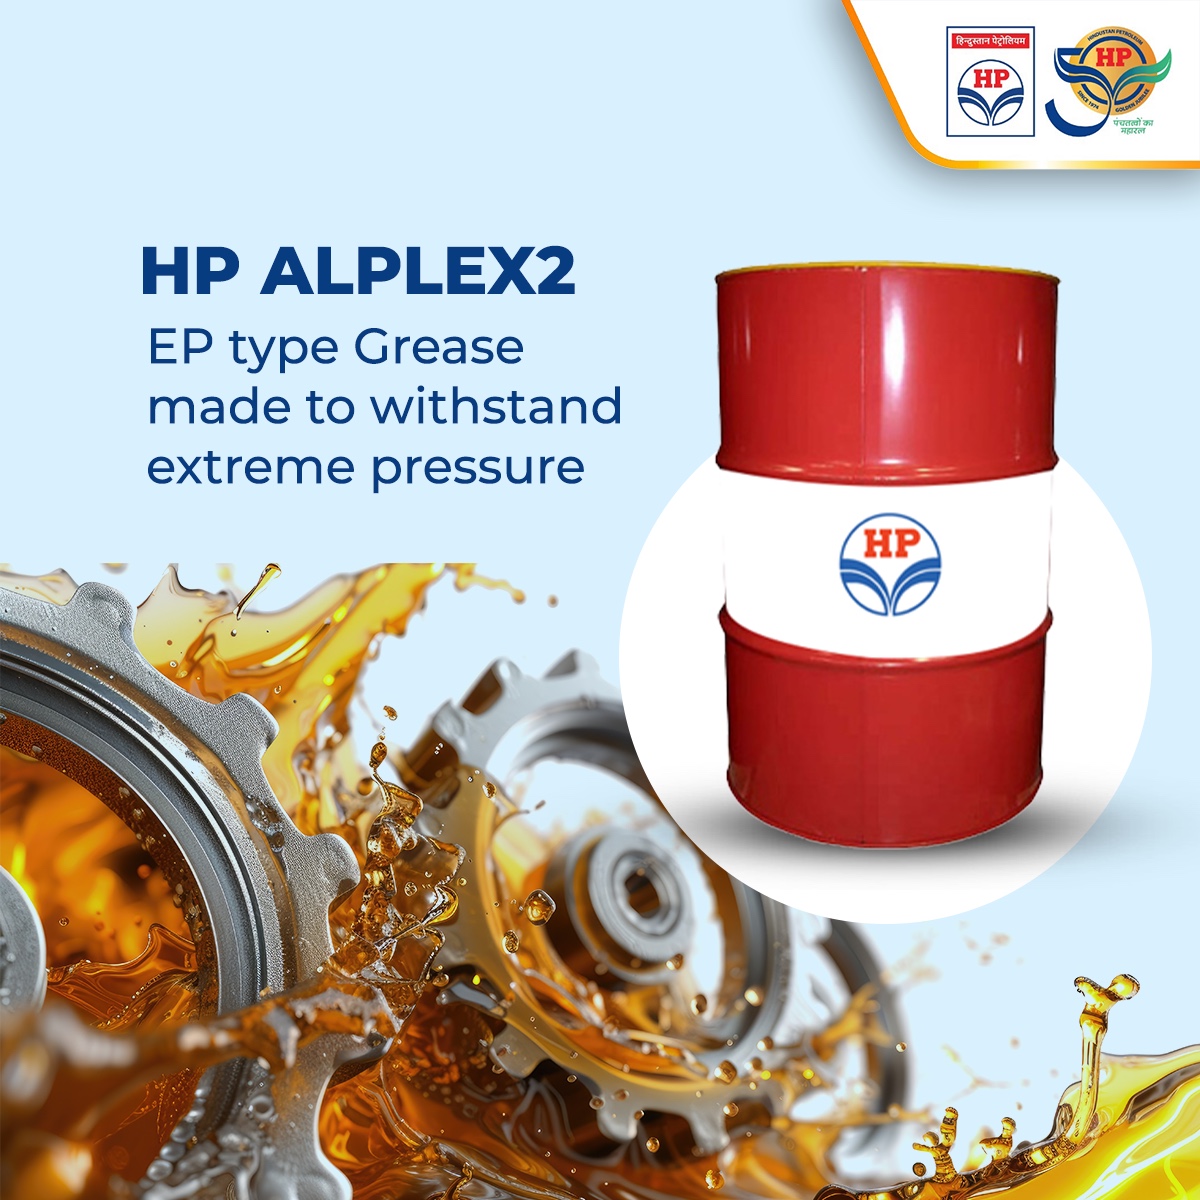 With the ability to withstand extreme pressure properties, HP ALPLEX 2 is an EP-type Grease with excellent mechanical stability that provides adequate protection to bearings. #HPALPLEX2 #EPTypeGrease #HPTowardsGoldenHorizon #HPCL #DeliveringHappiness